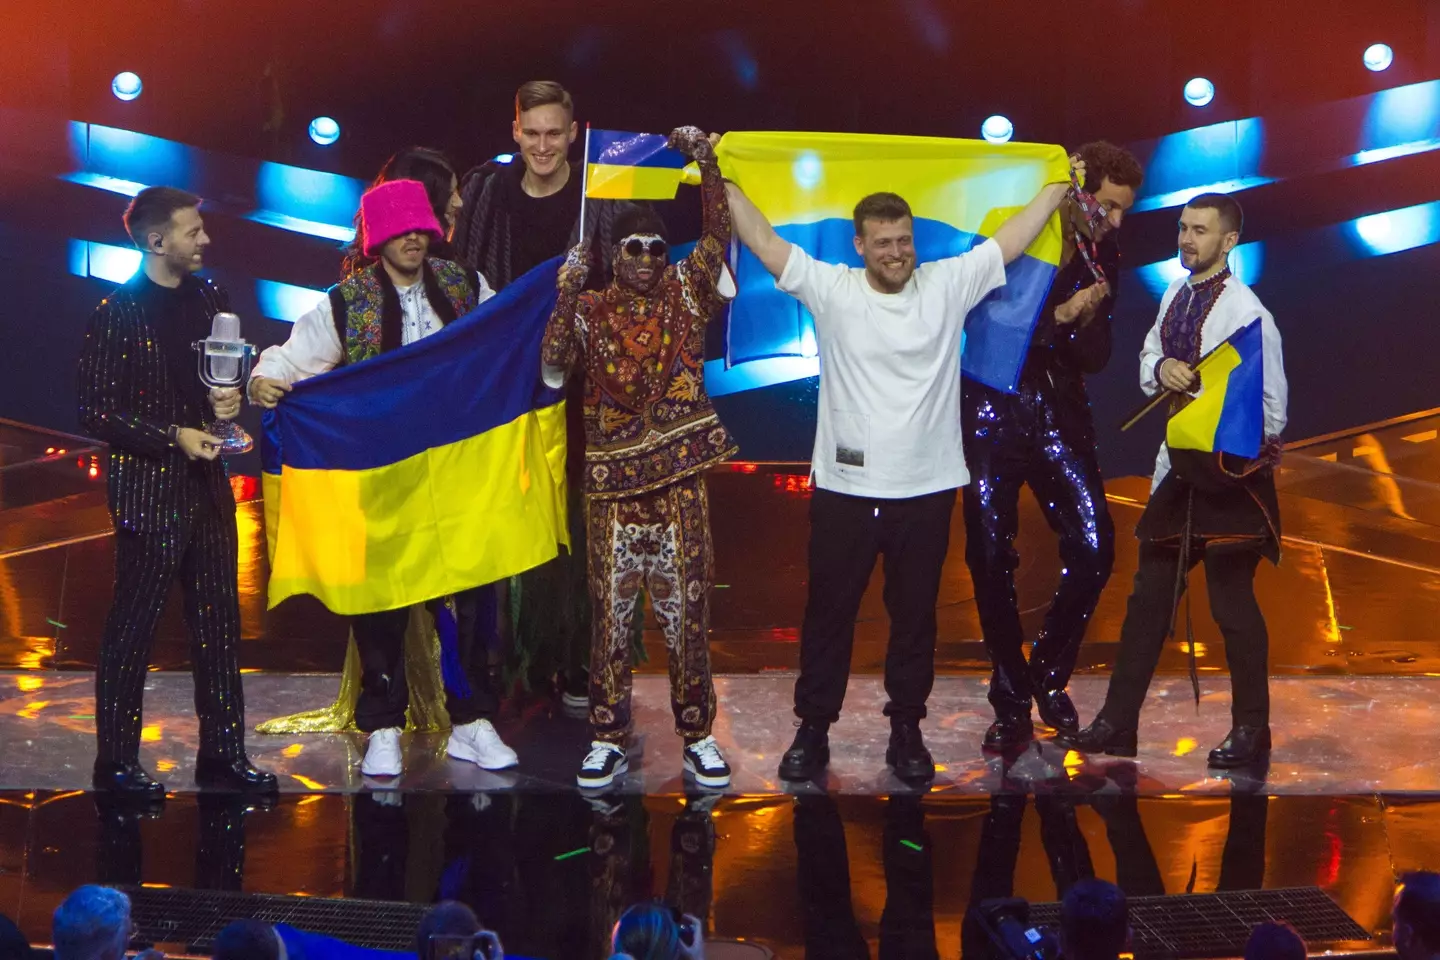 Russian journalists have spoken out against Ukraine's Eurovision win.